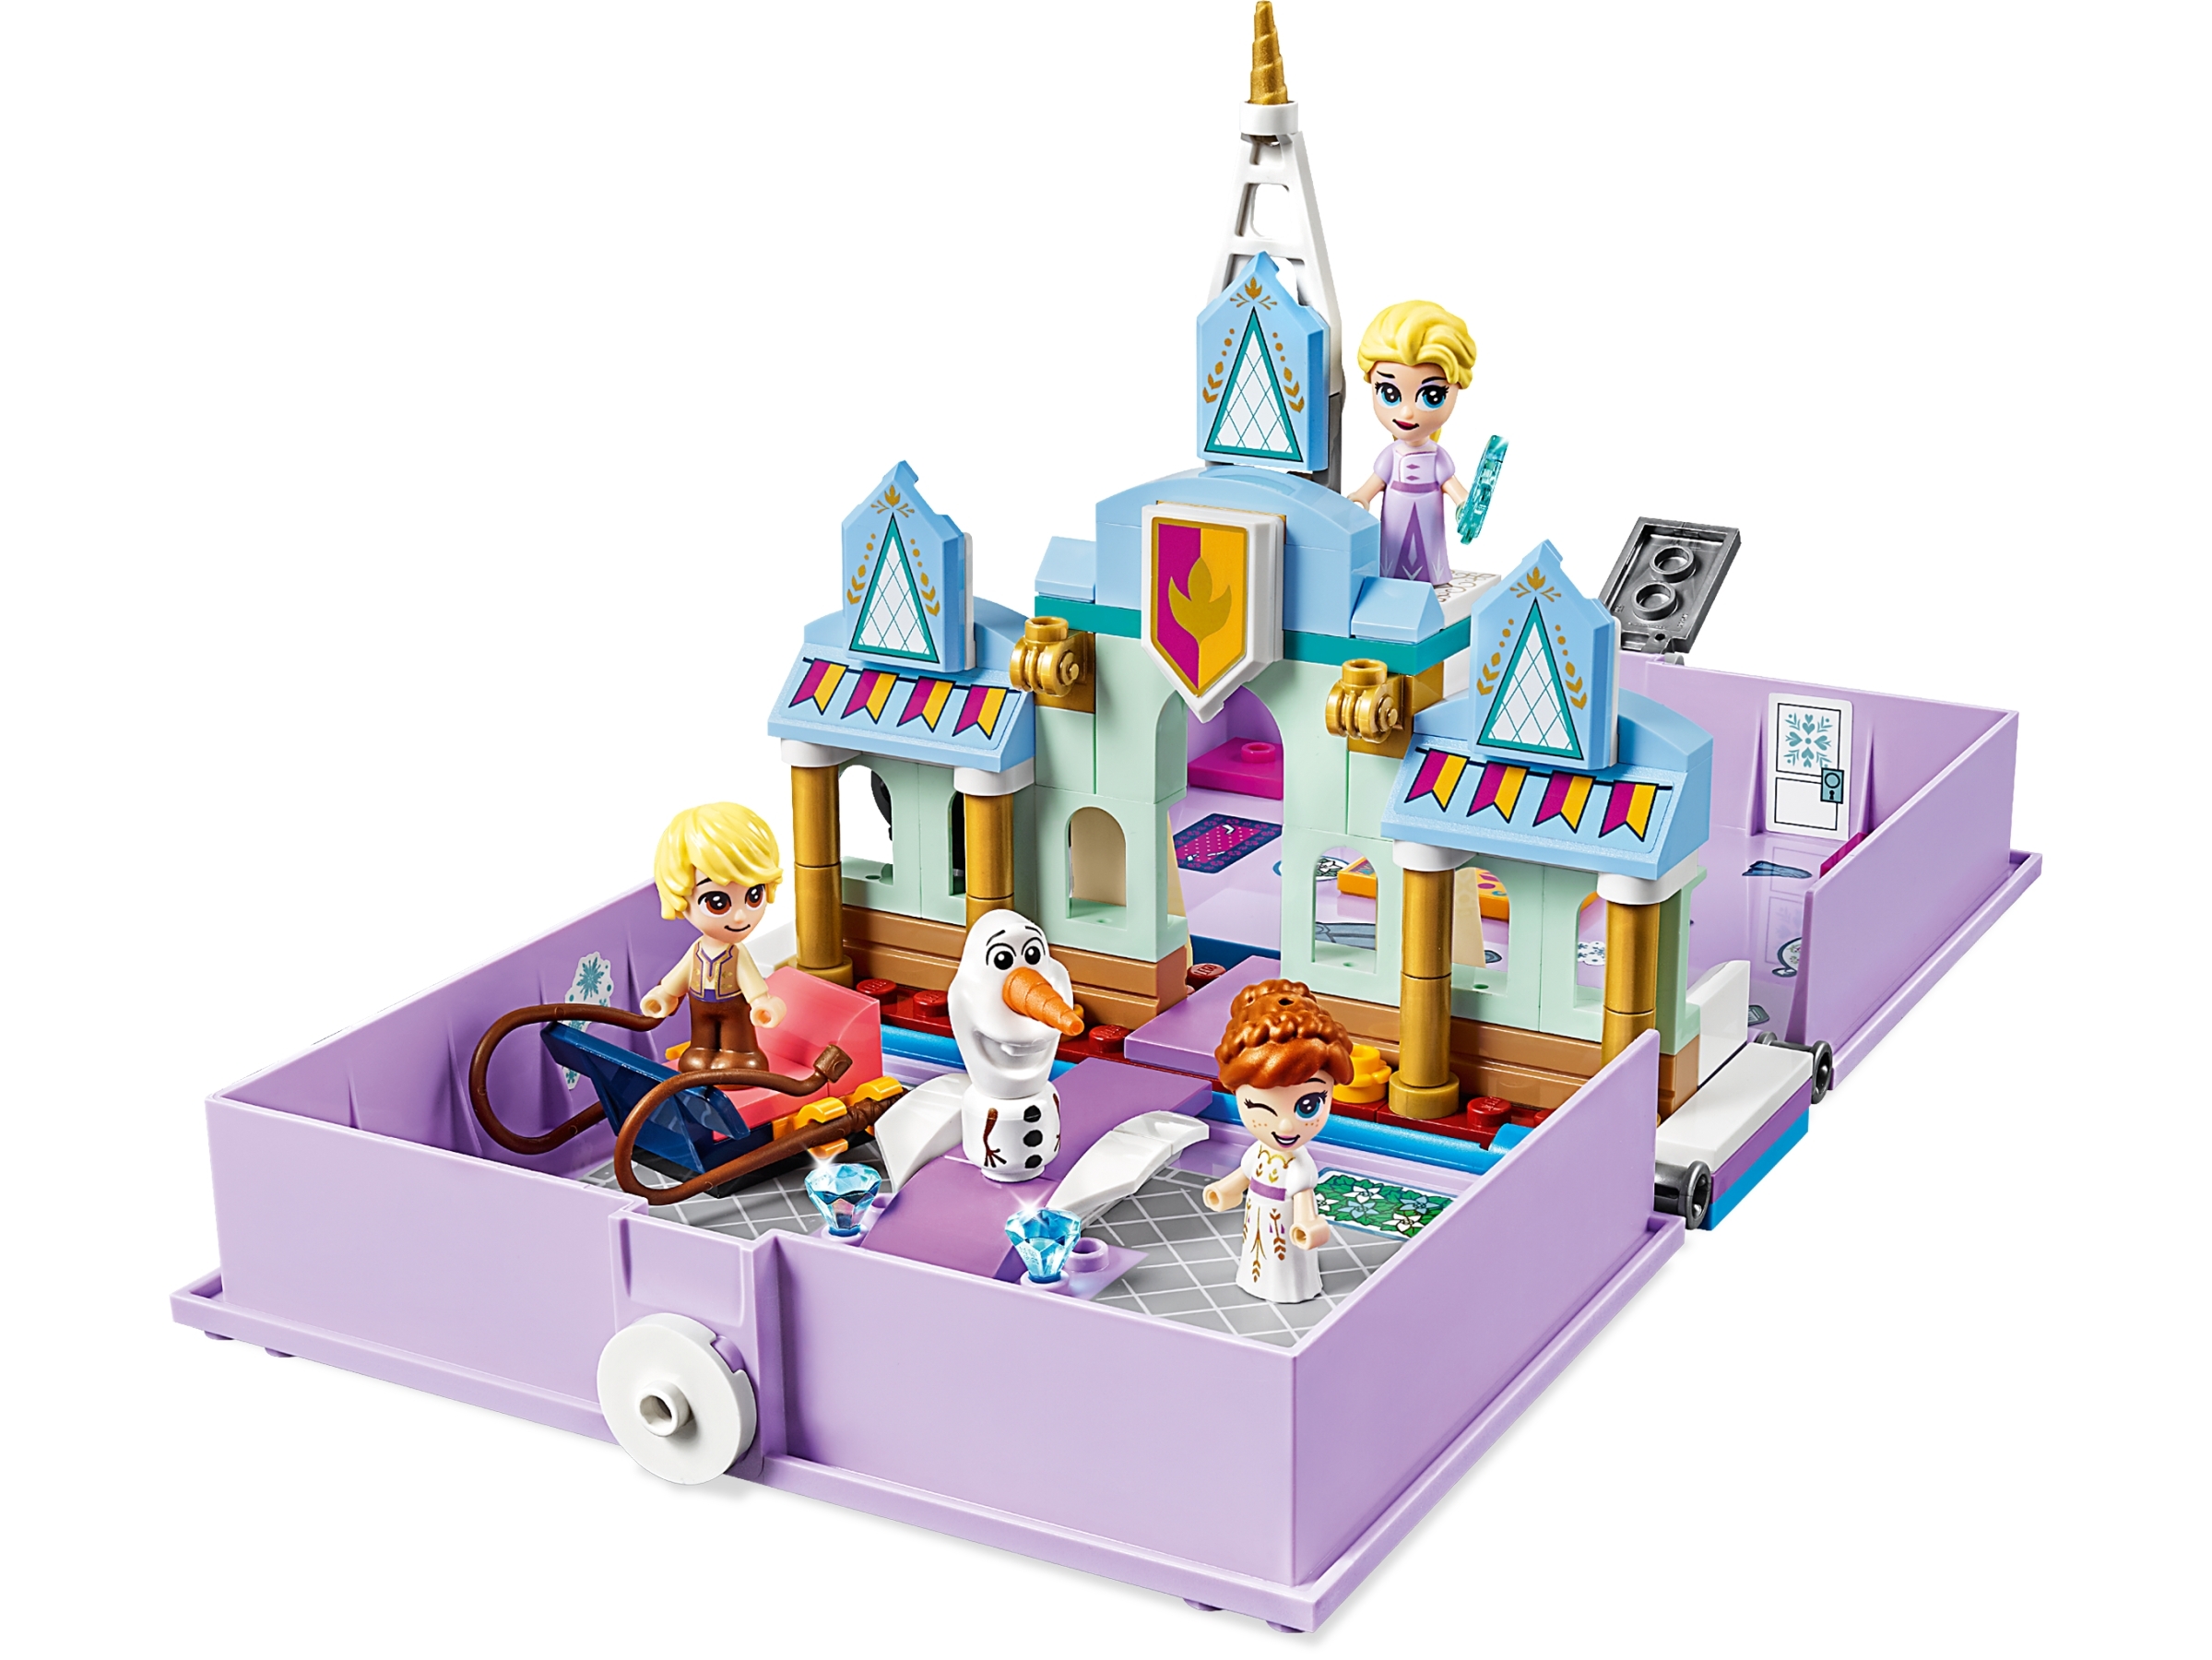 Anna and Elsa's Storybook Adventures 43175 | Frozen | Buy online the Official LEGO® Shop US